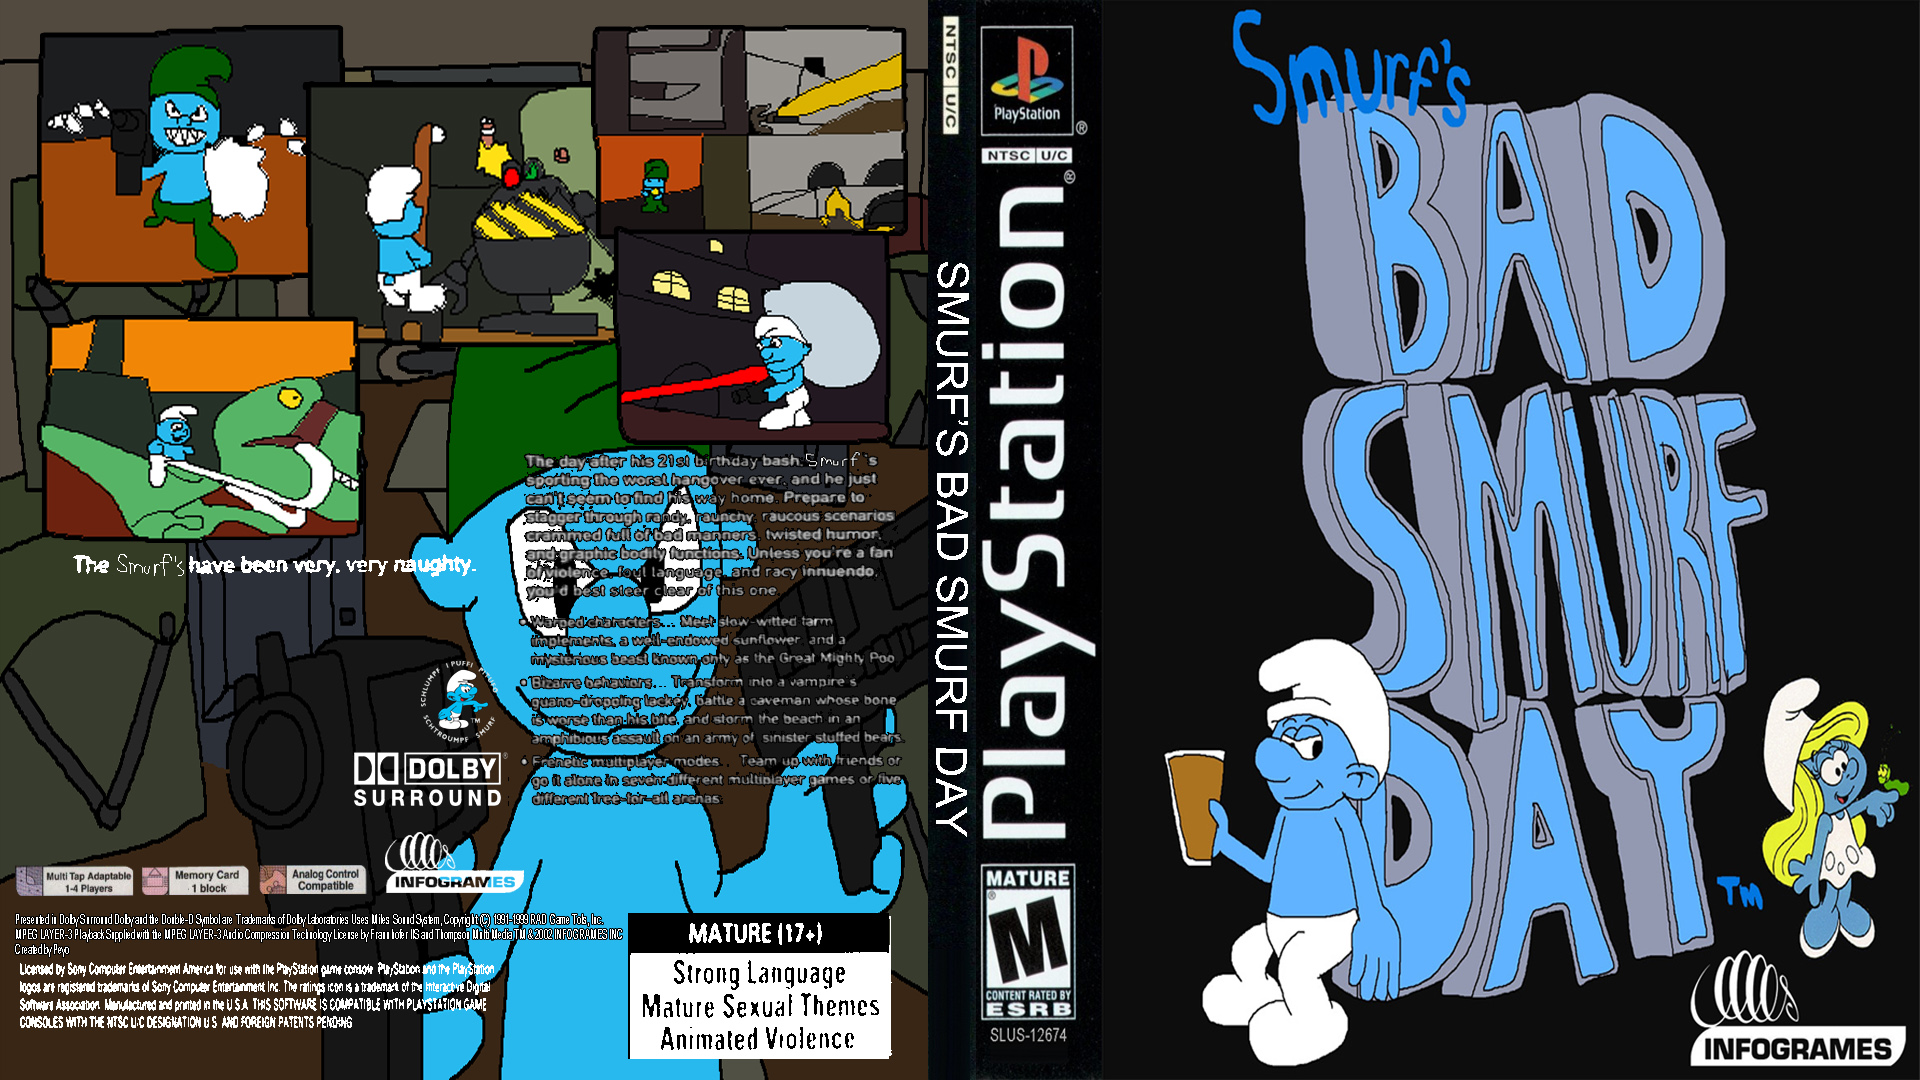 Smurf's Bad Smurf Day PS1 cover by Rainbow-Dash-Rockz